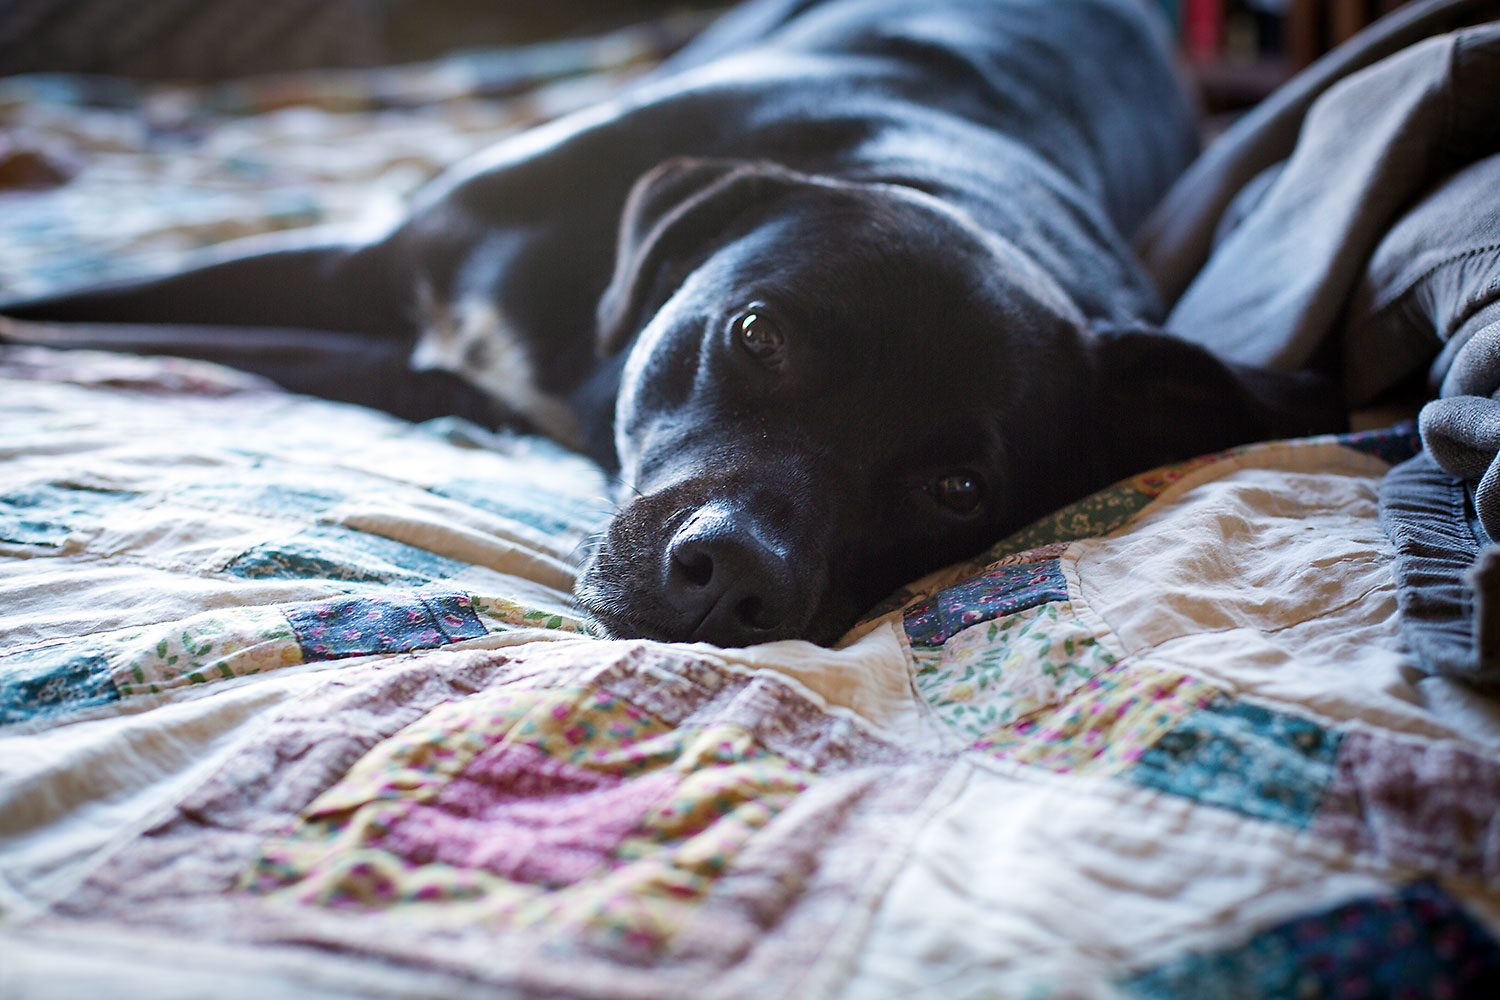 A black dog, stretched out on a shabby quilt, looks blankly at the viewer.